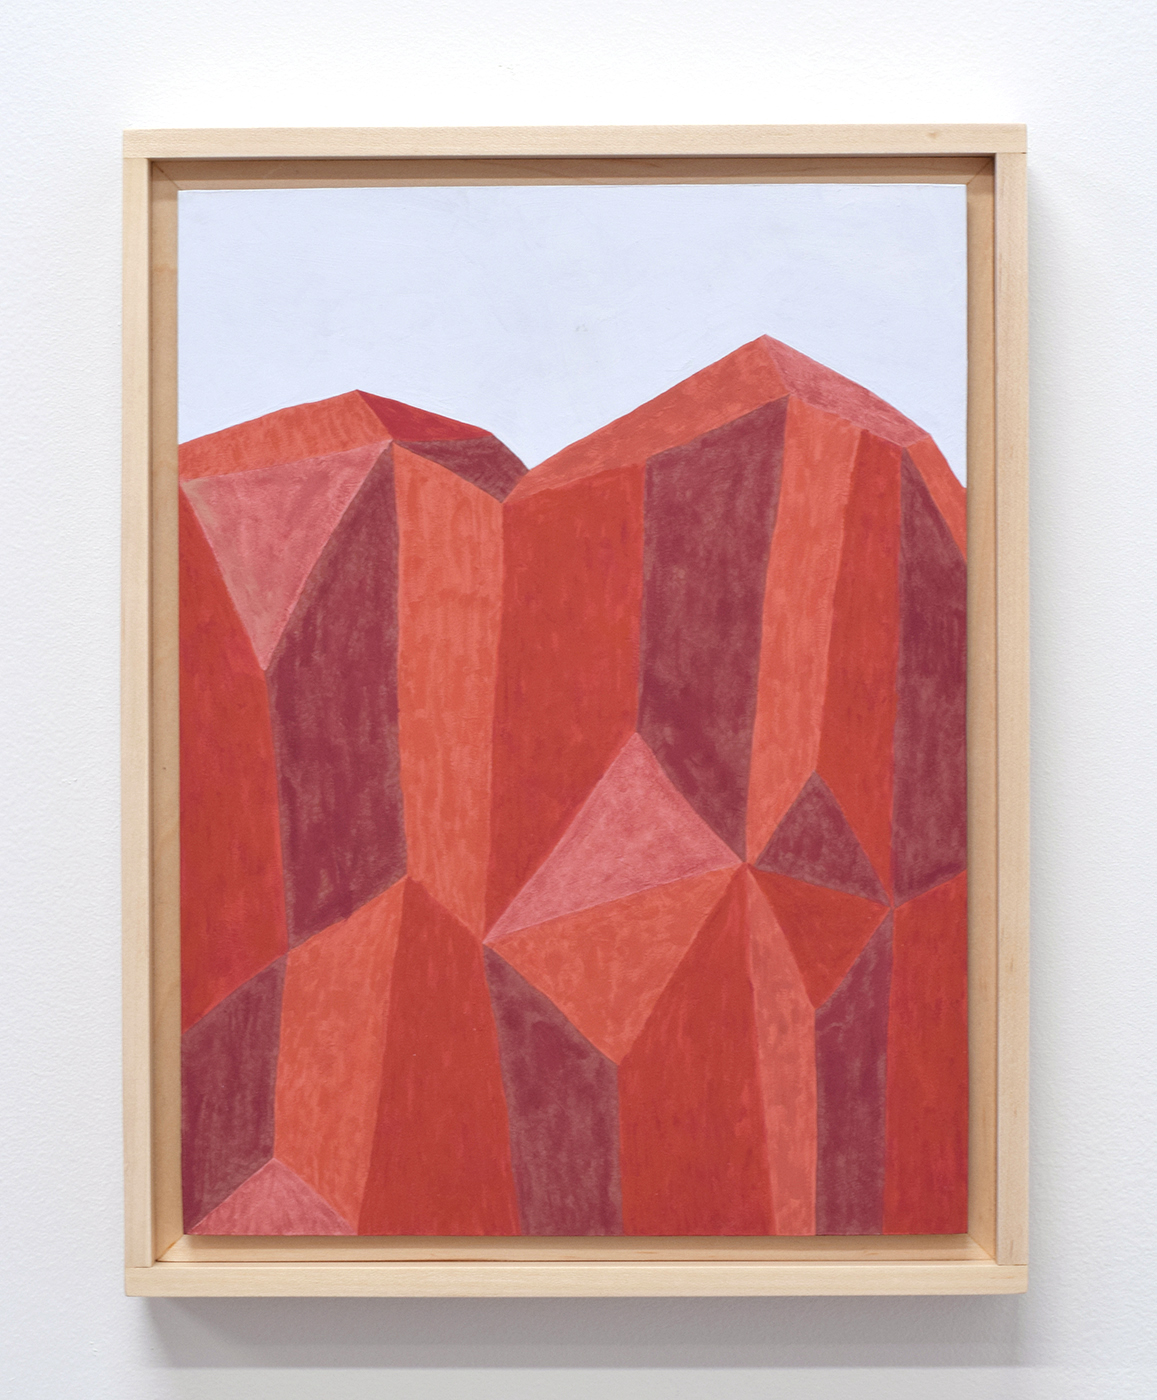   Red Cliff,  2017  13 x 10 inches  gouache on paper, aluminum, and maple frame 